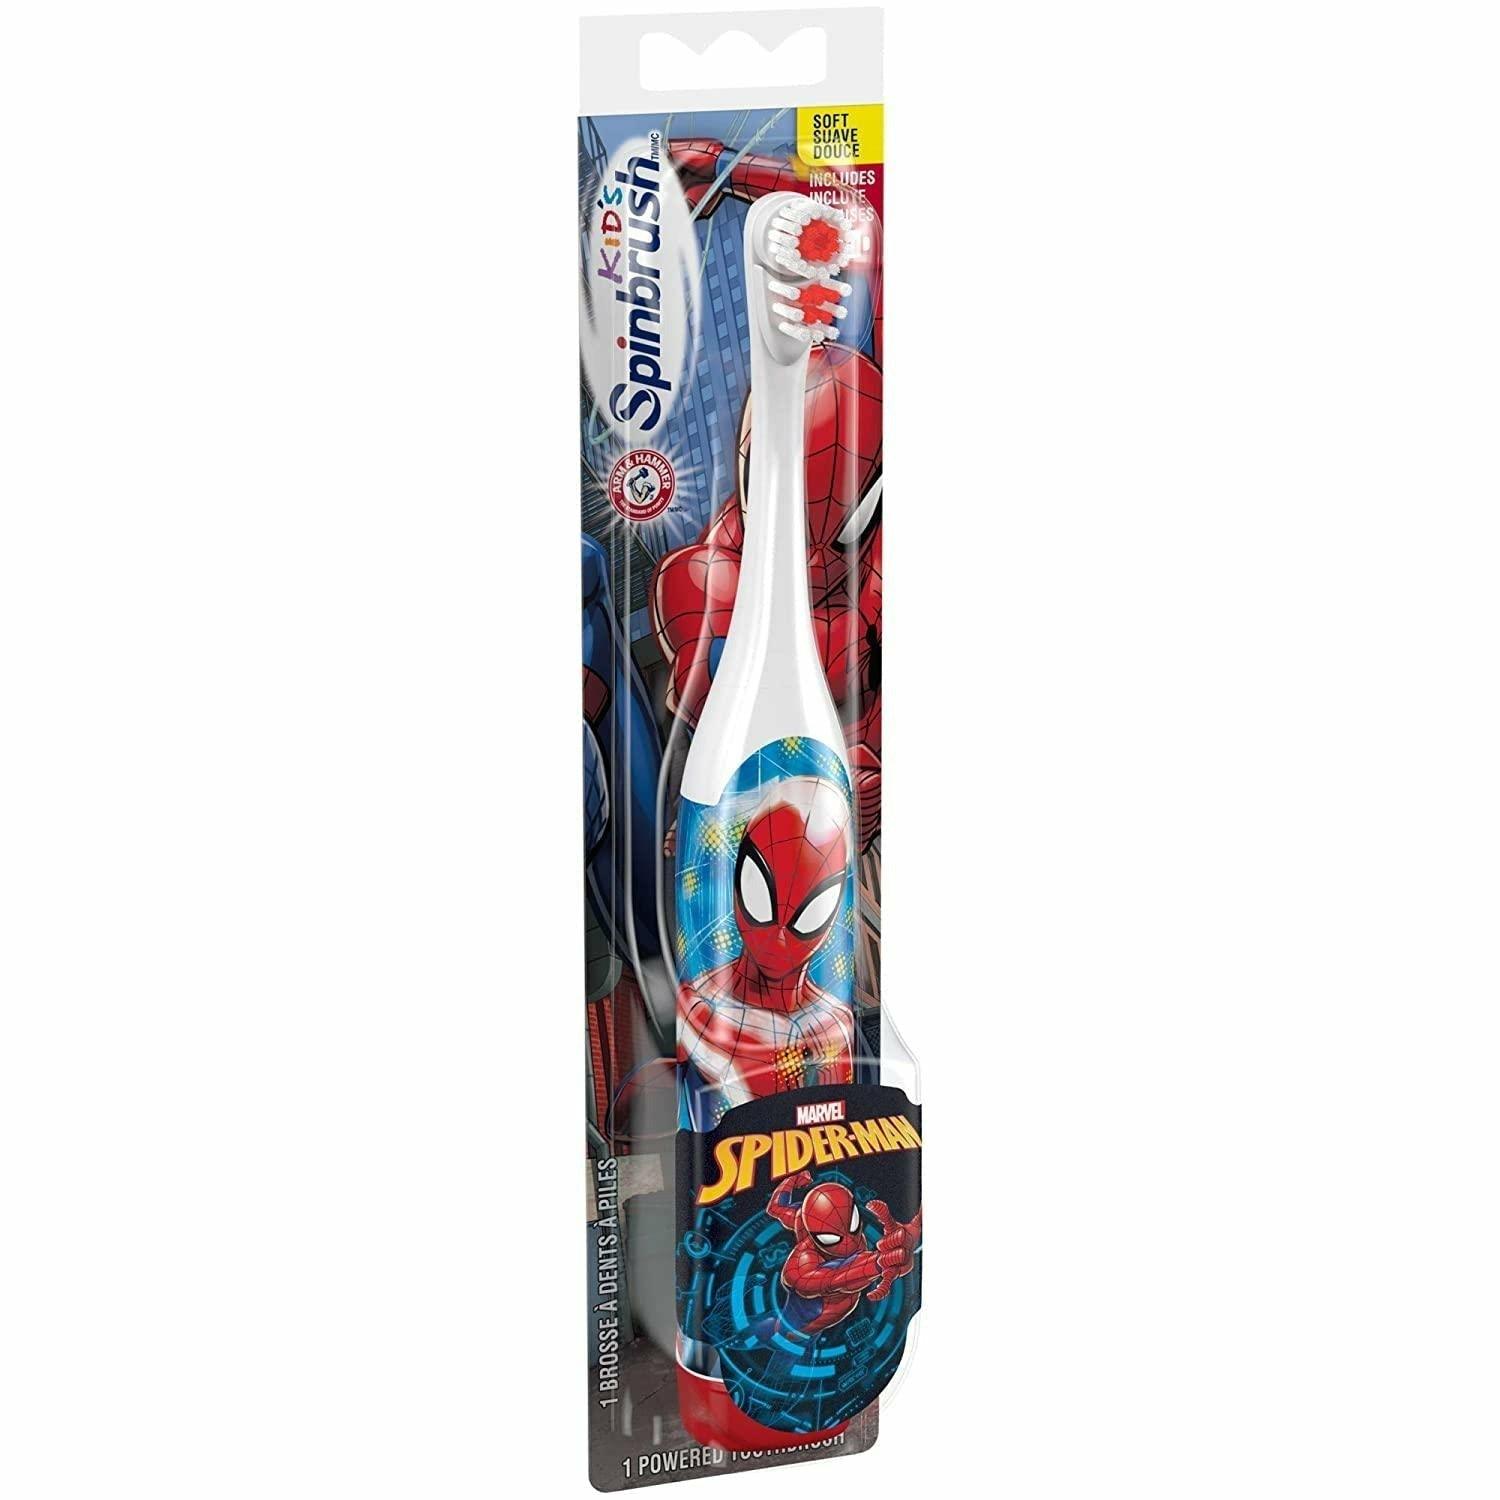 Arm & Hammer Kid's Spinbrush Spiderman Powered Toothbrush, 1 count - BumbleToys - 5-7 Years, 8-13 Years, Baby Saftey & Health, Boys, Spider man, Spiderman